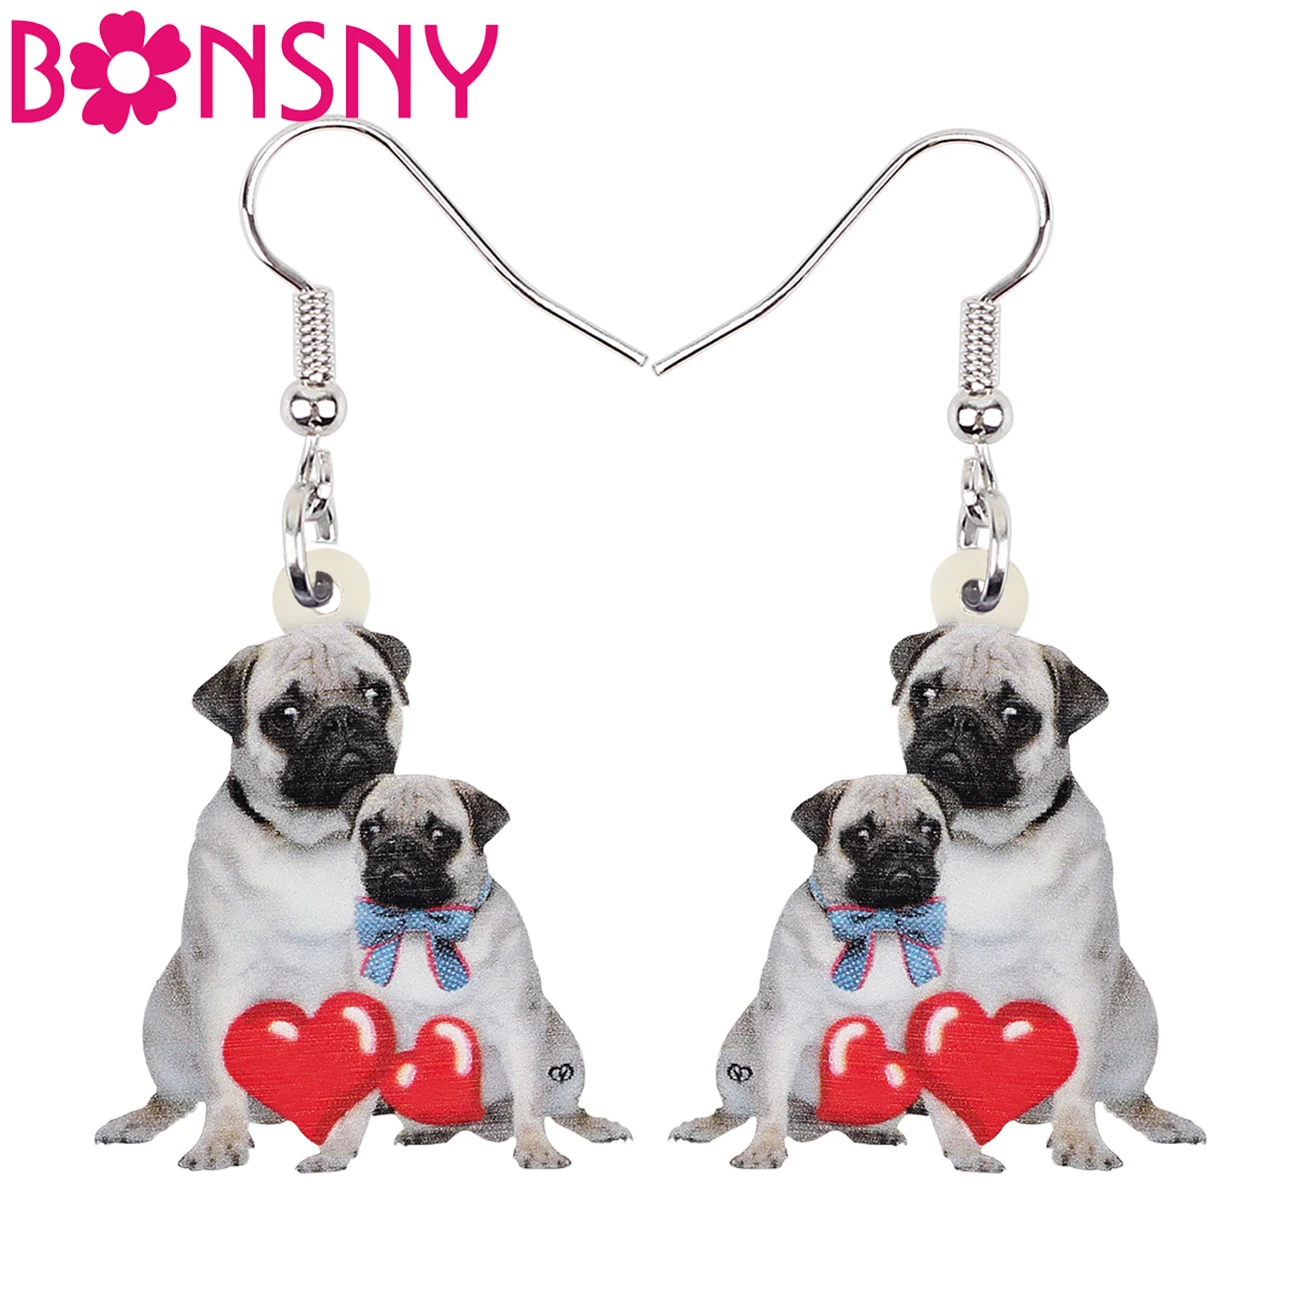 

BONSNY Mother's Day Acrylic White Heart Pug Dogs Earrings Big Drop Dangle Fashion Pets Gifts Jewelry For Women Girls Gifts